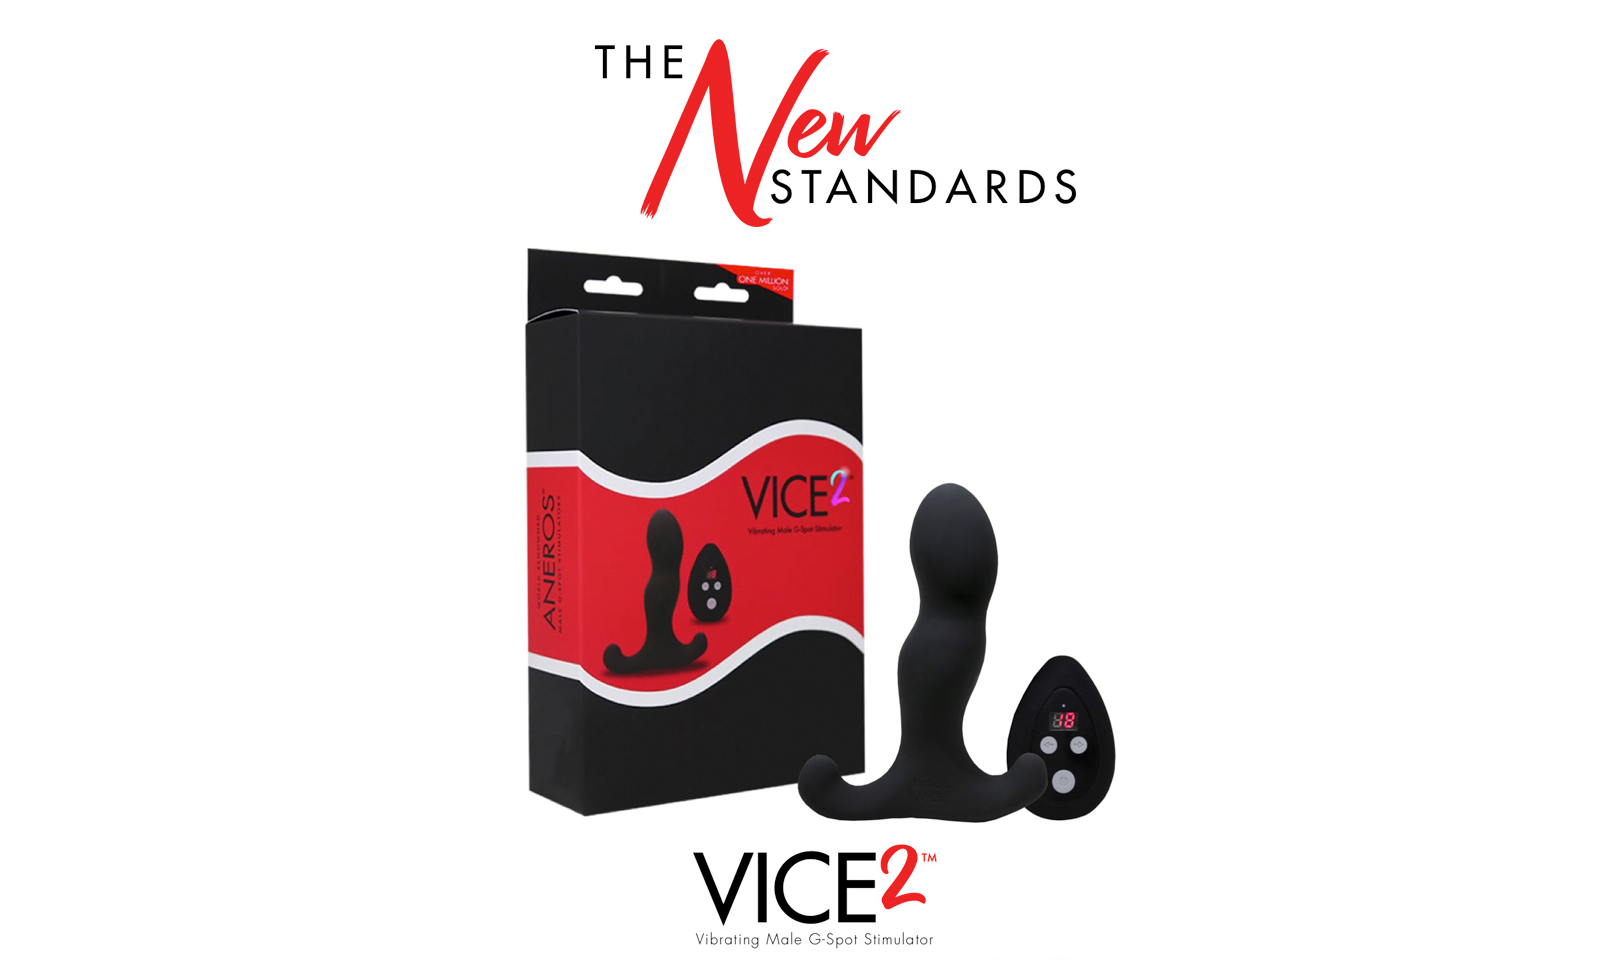 Vice 2 Out Now from Aneros